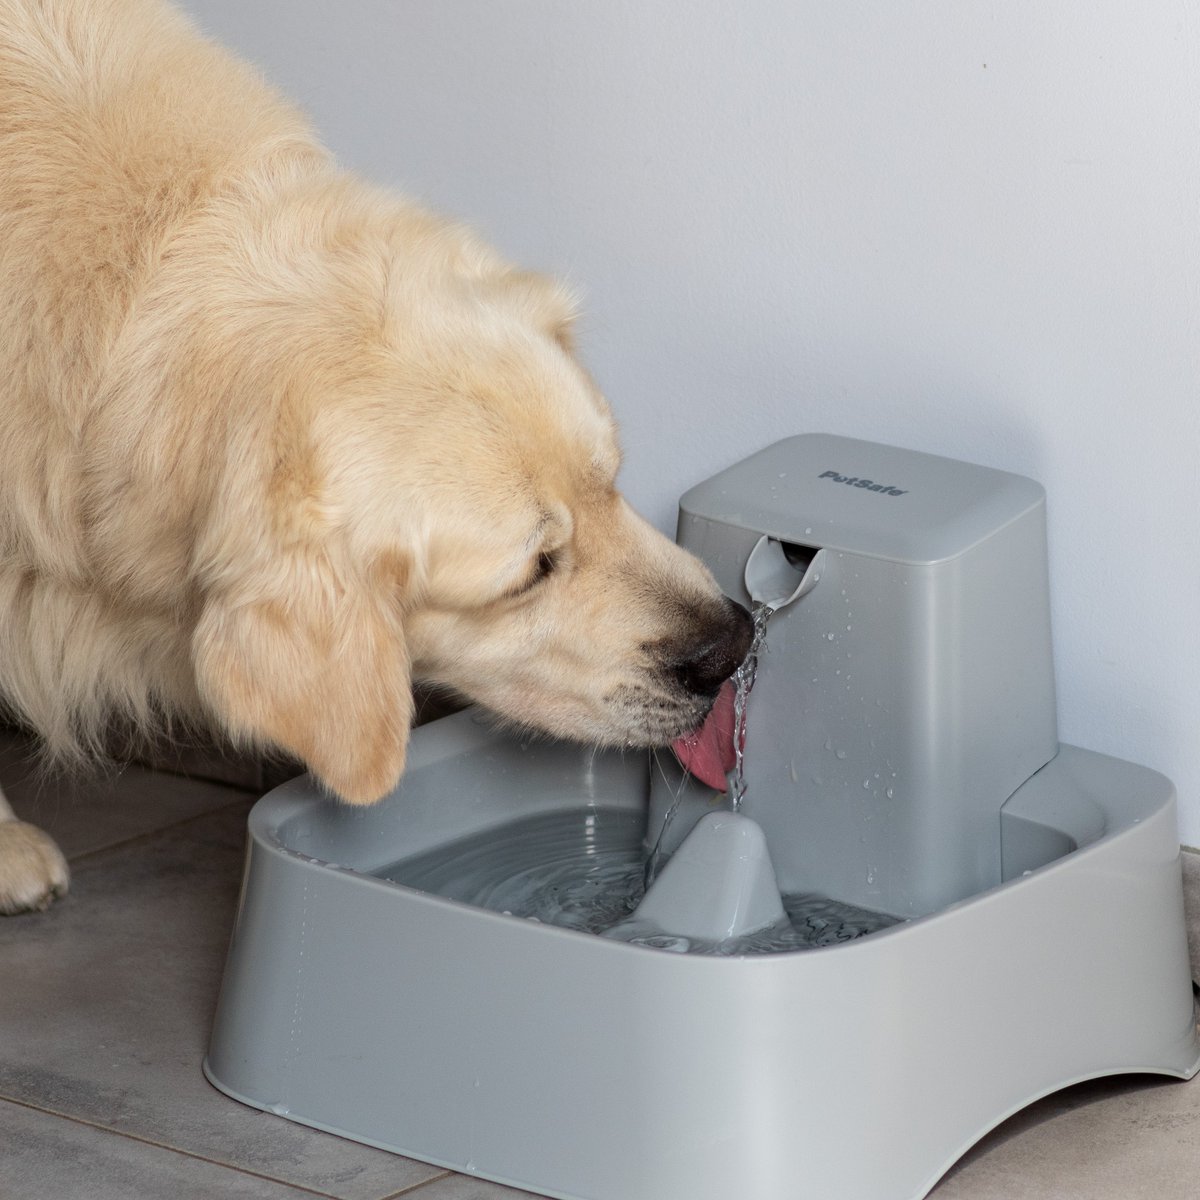 🐾GIVEAWAY 🐾 Want to win a fountain for your furry friend? To enter: retweet, comment and follow @PetSafeUK #Giveaway #Competiton